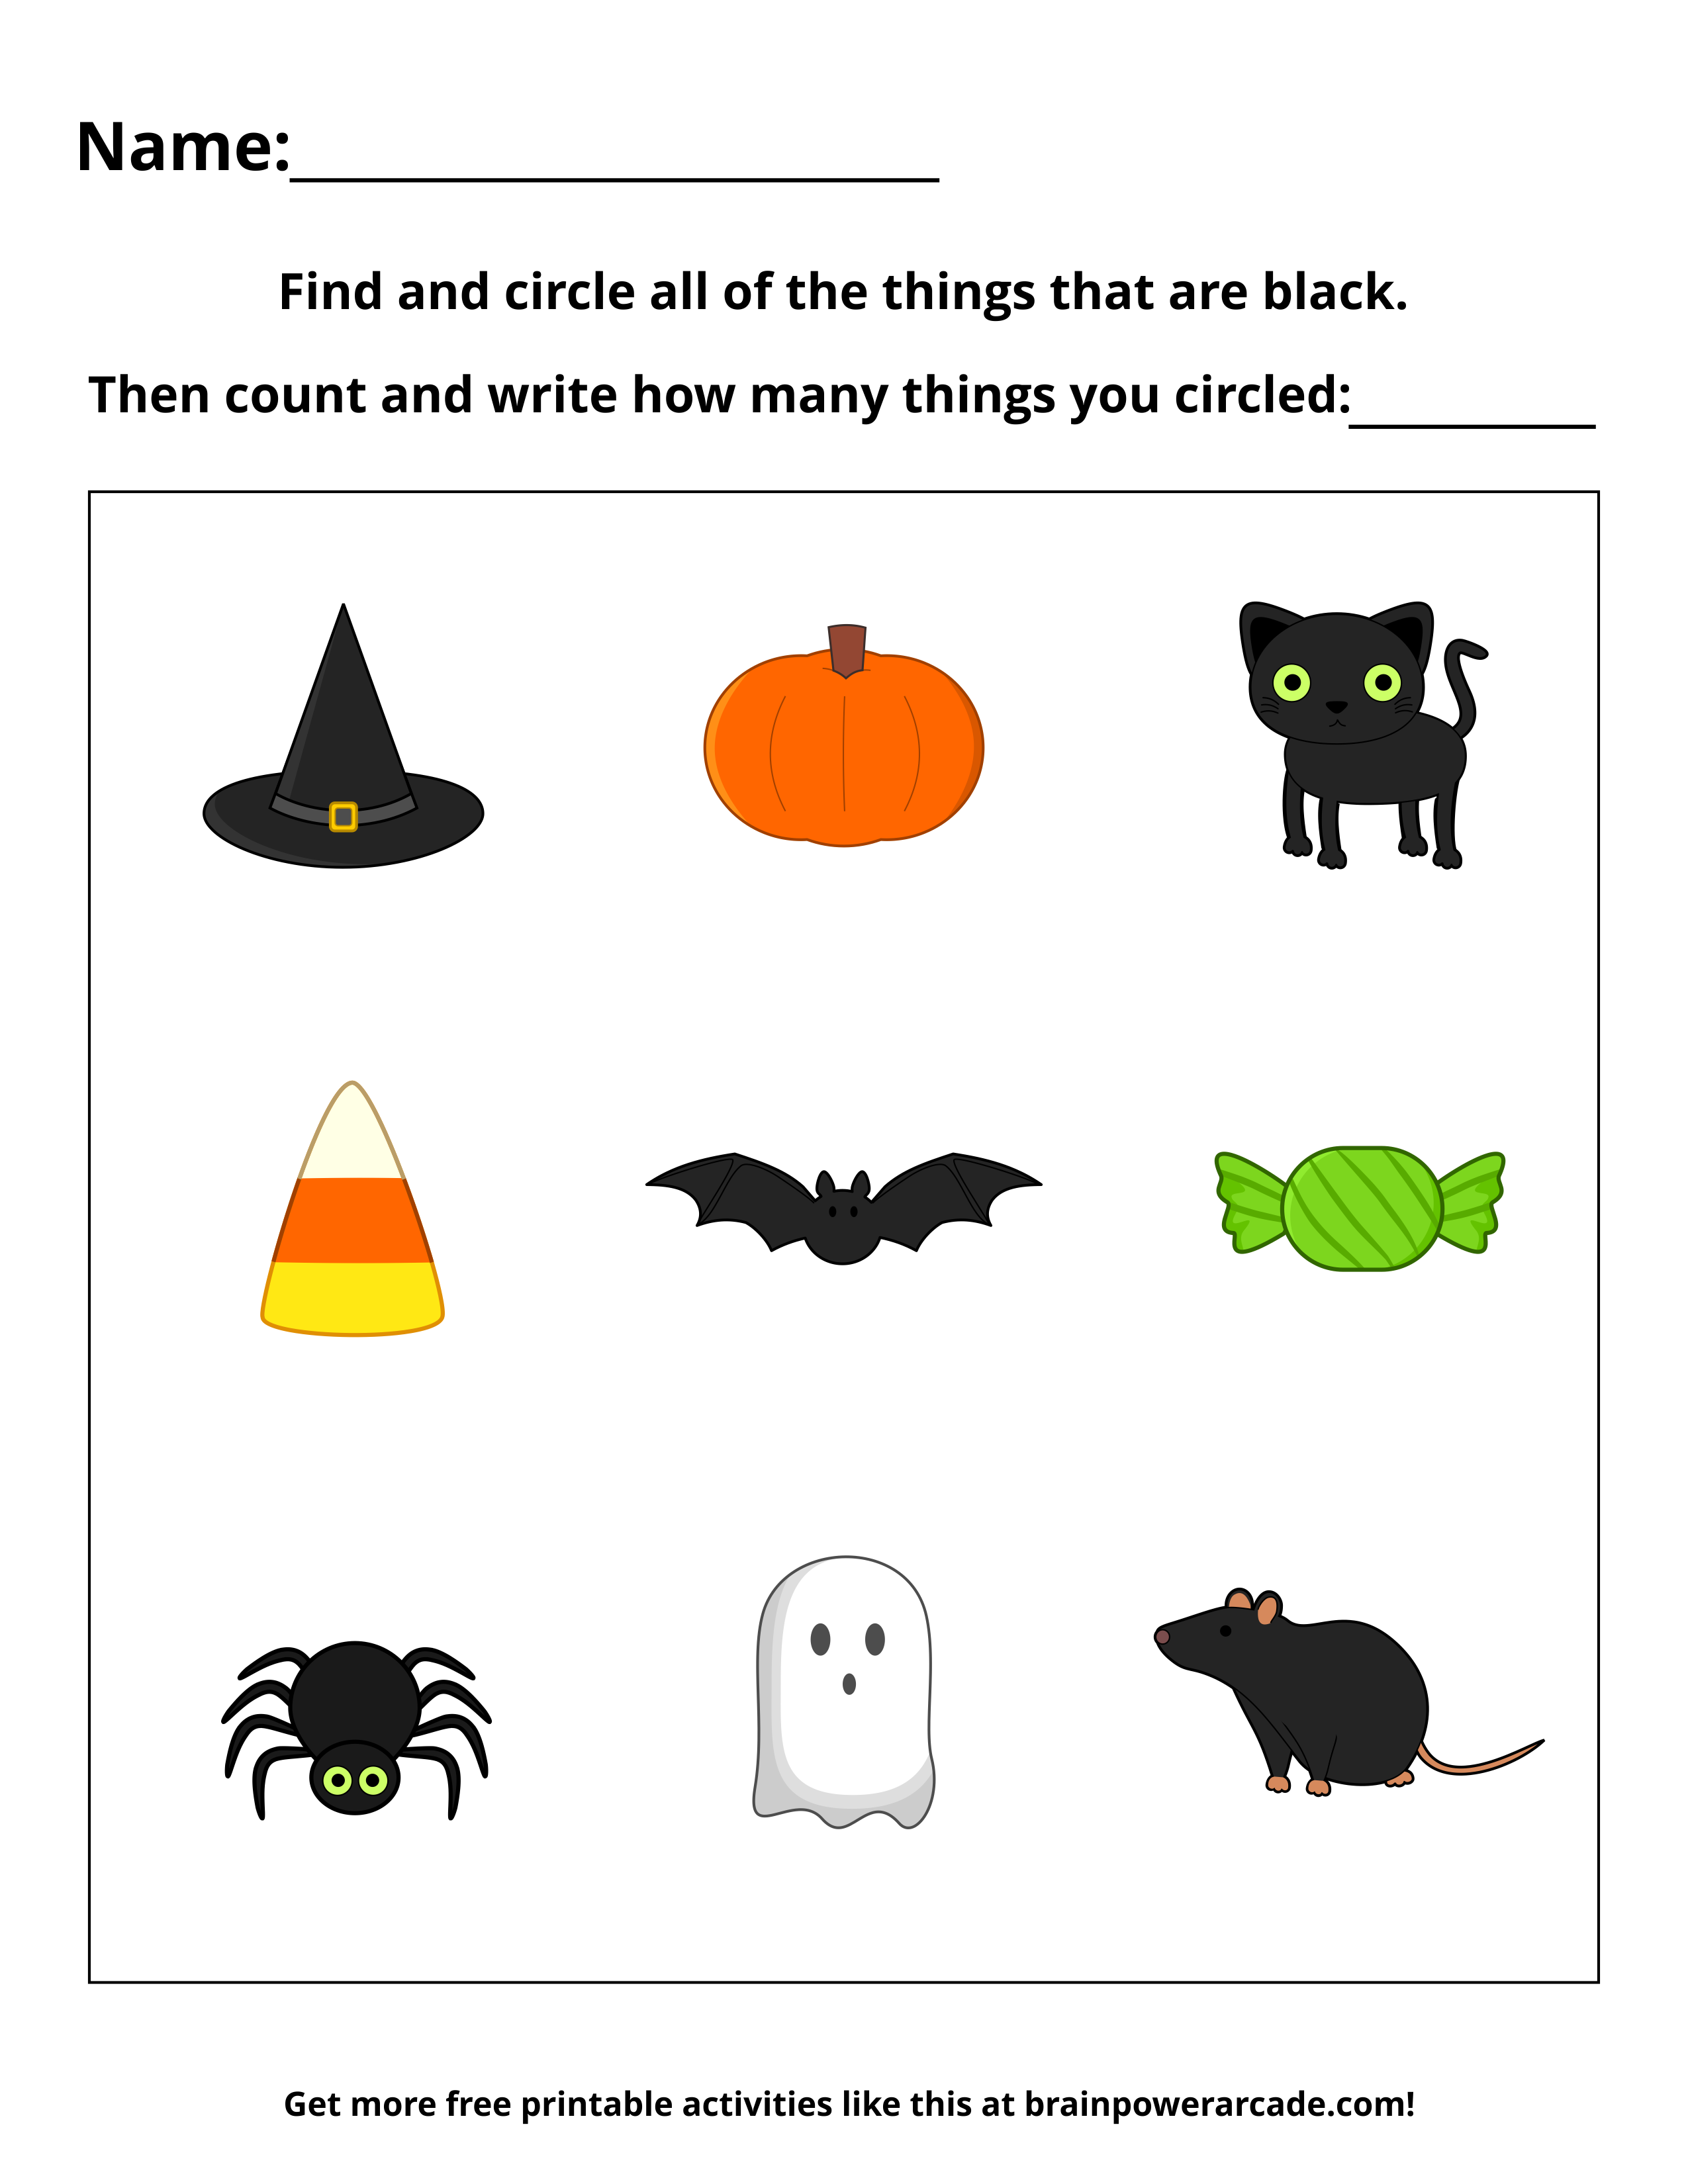 Find and Circle Things That are Black